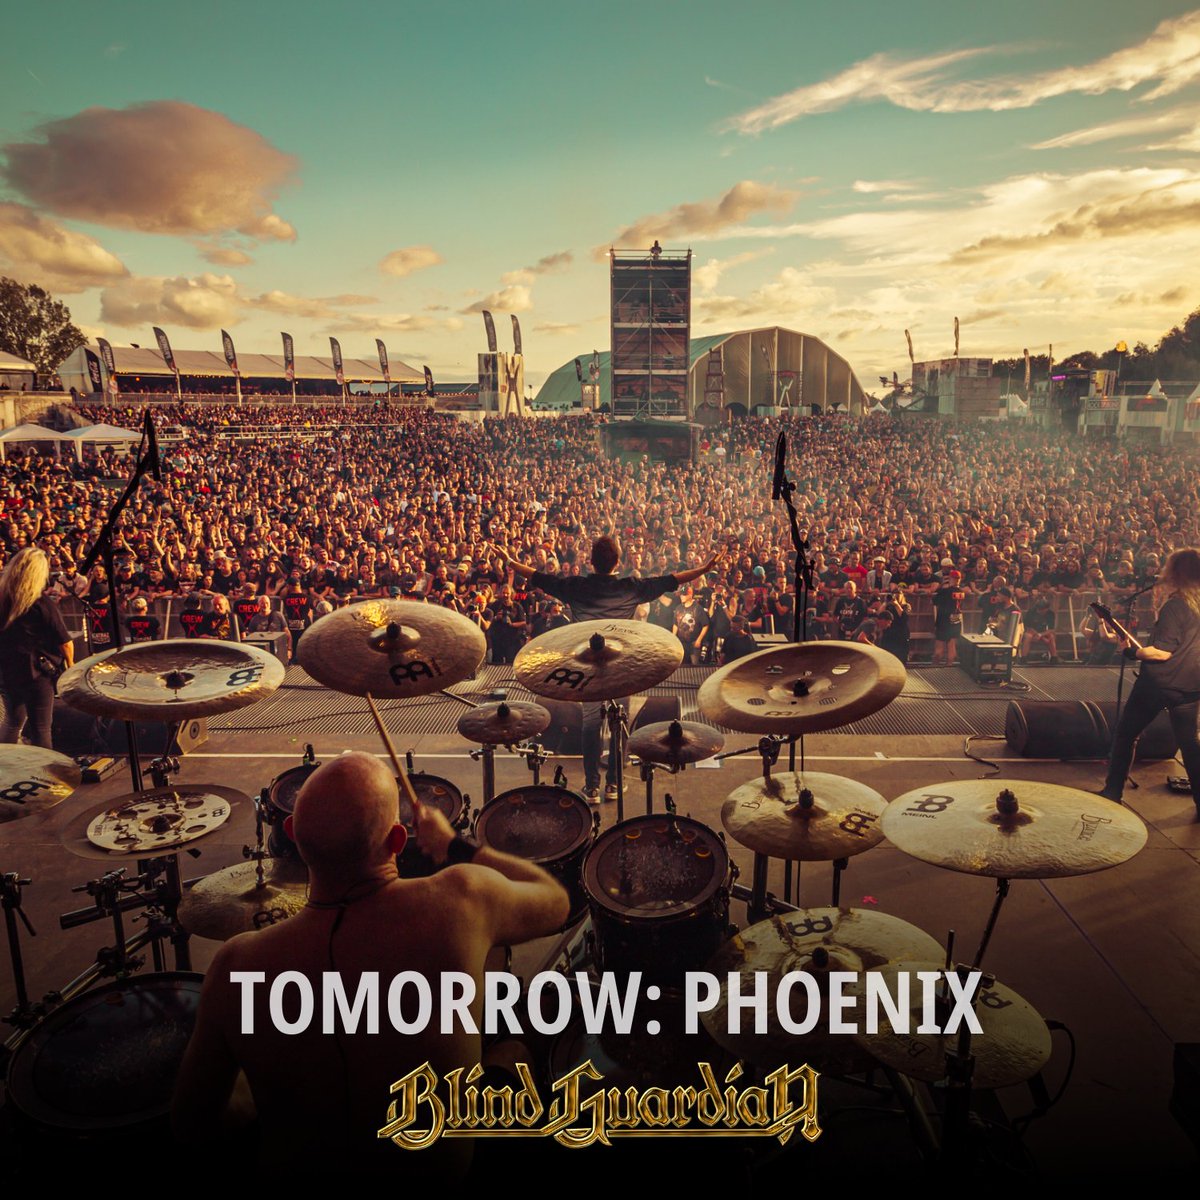 Tomorrow we will arrive in the 'Valley of the Sun' – Phoenix, Arizona, let's rock the Crescent Ballroom! Get the last tickets now! ➡️ blind-guardian.com/tour #blindguardian #blindguardianusa #blindguardianlive #thegodmachinetour